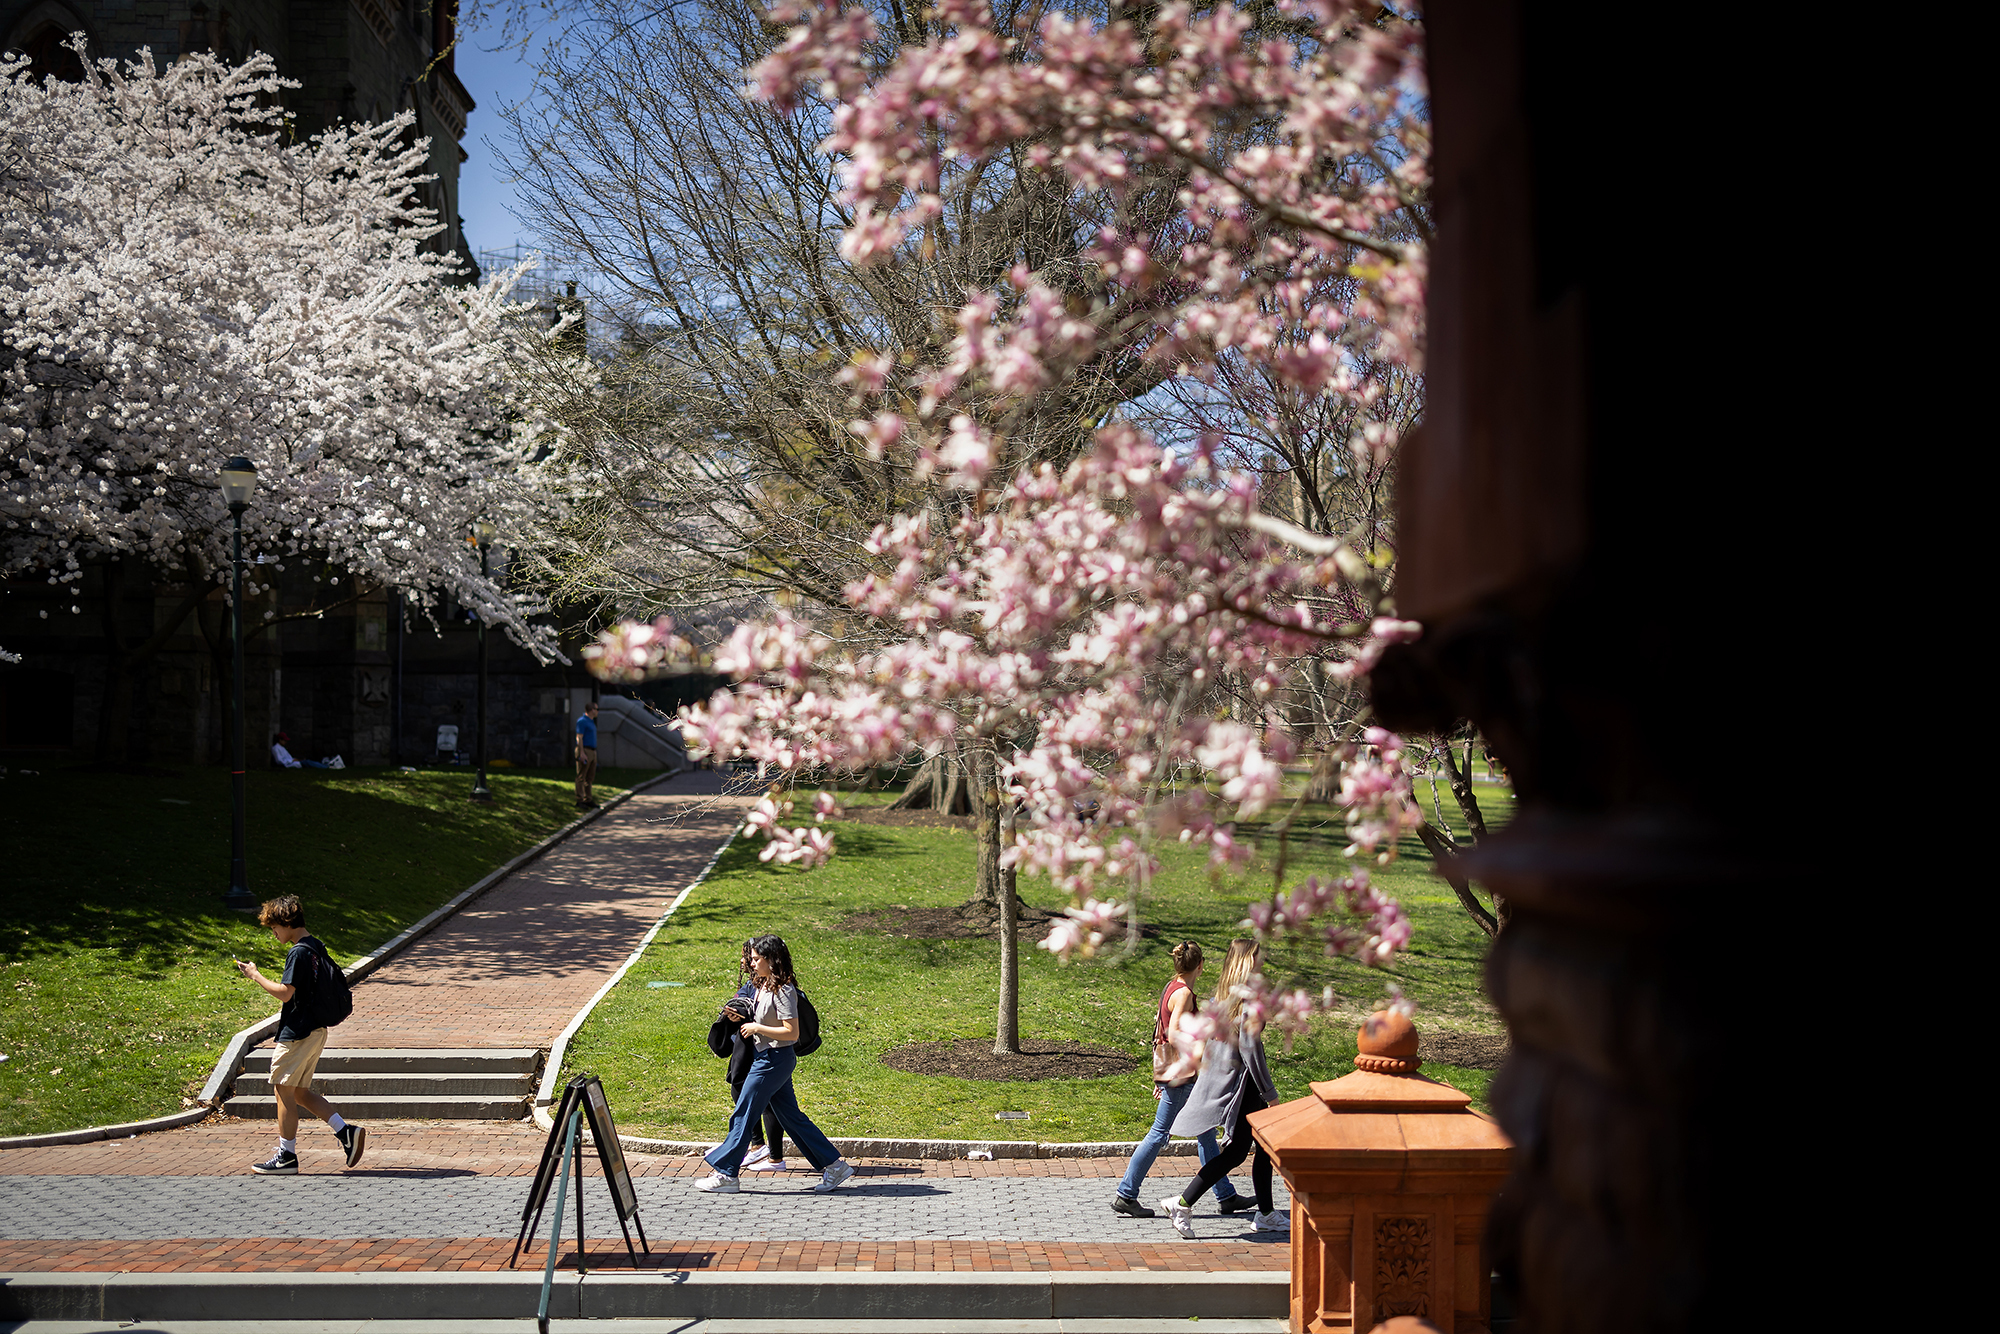 Campus photo, students walking, tree with pink flowers